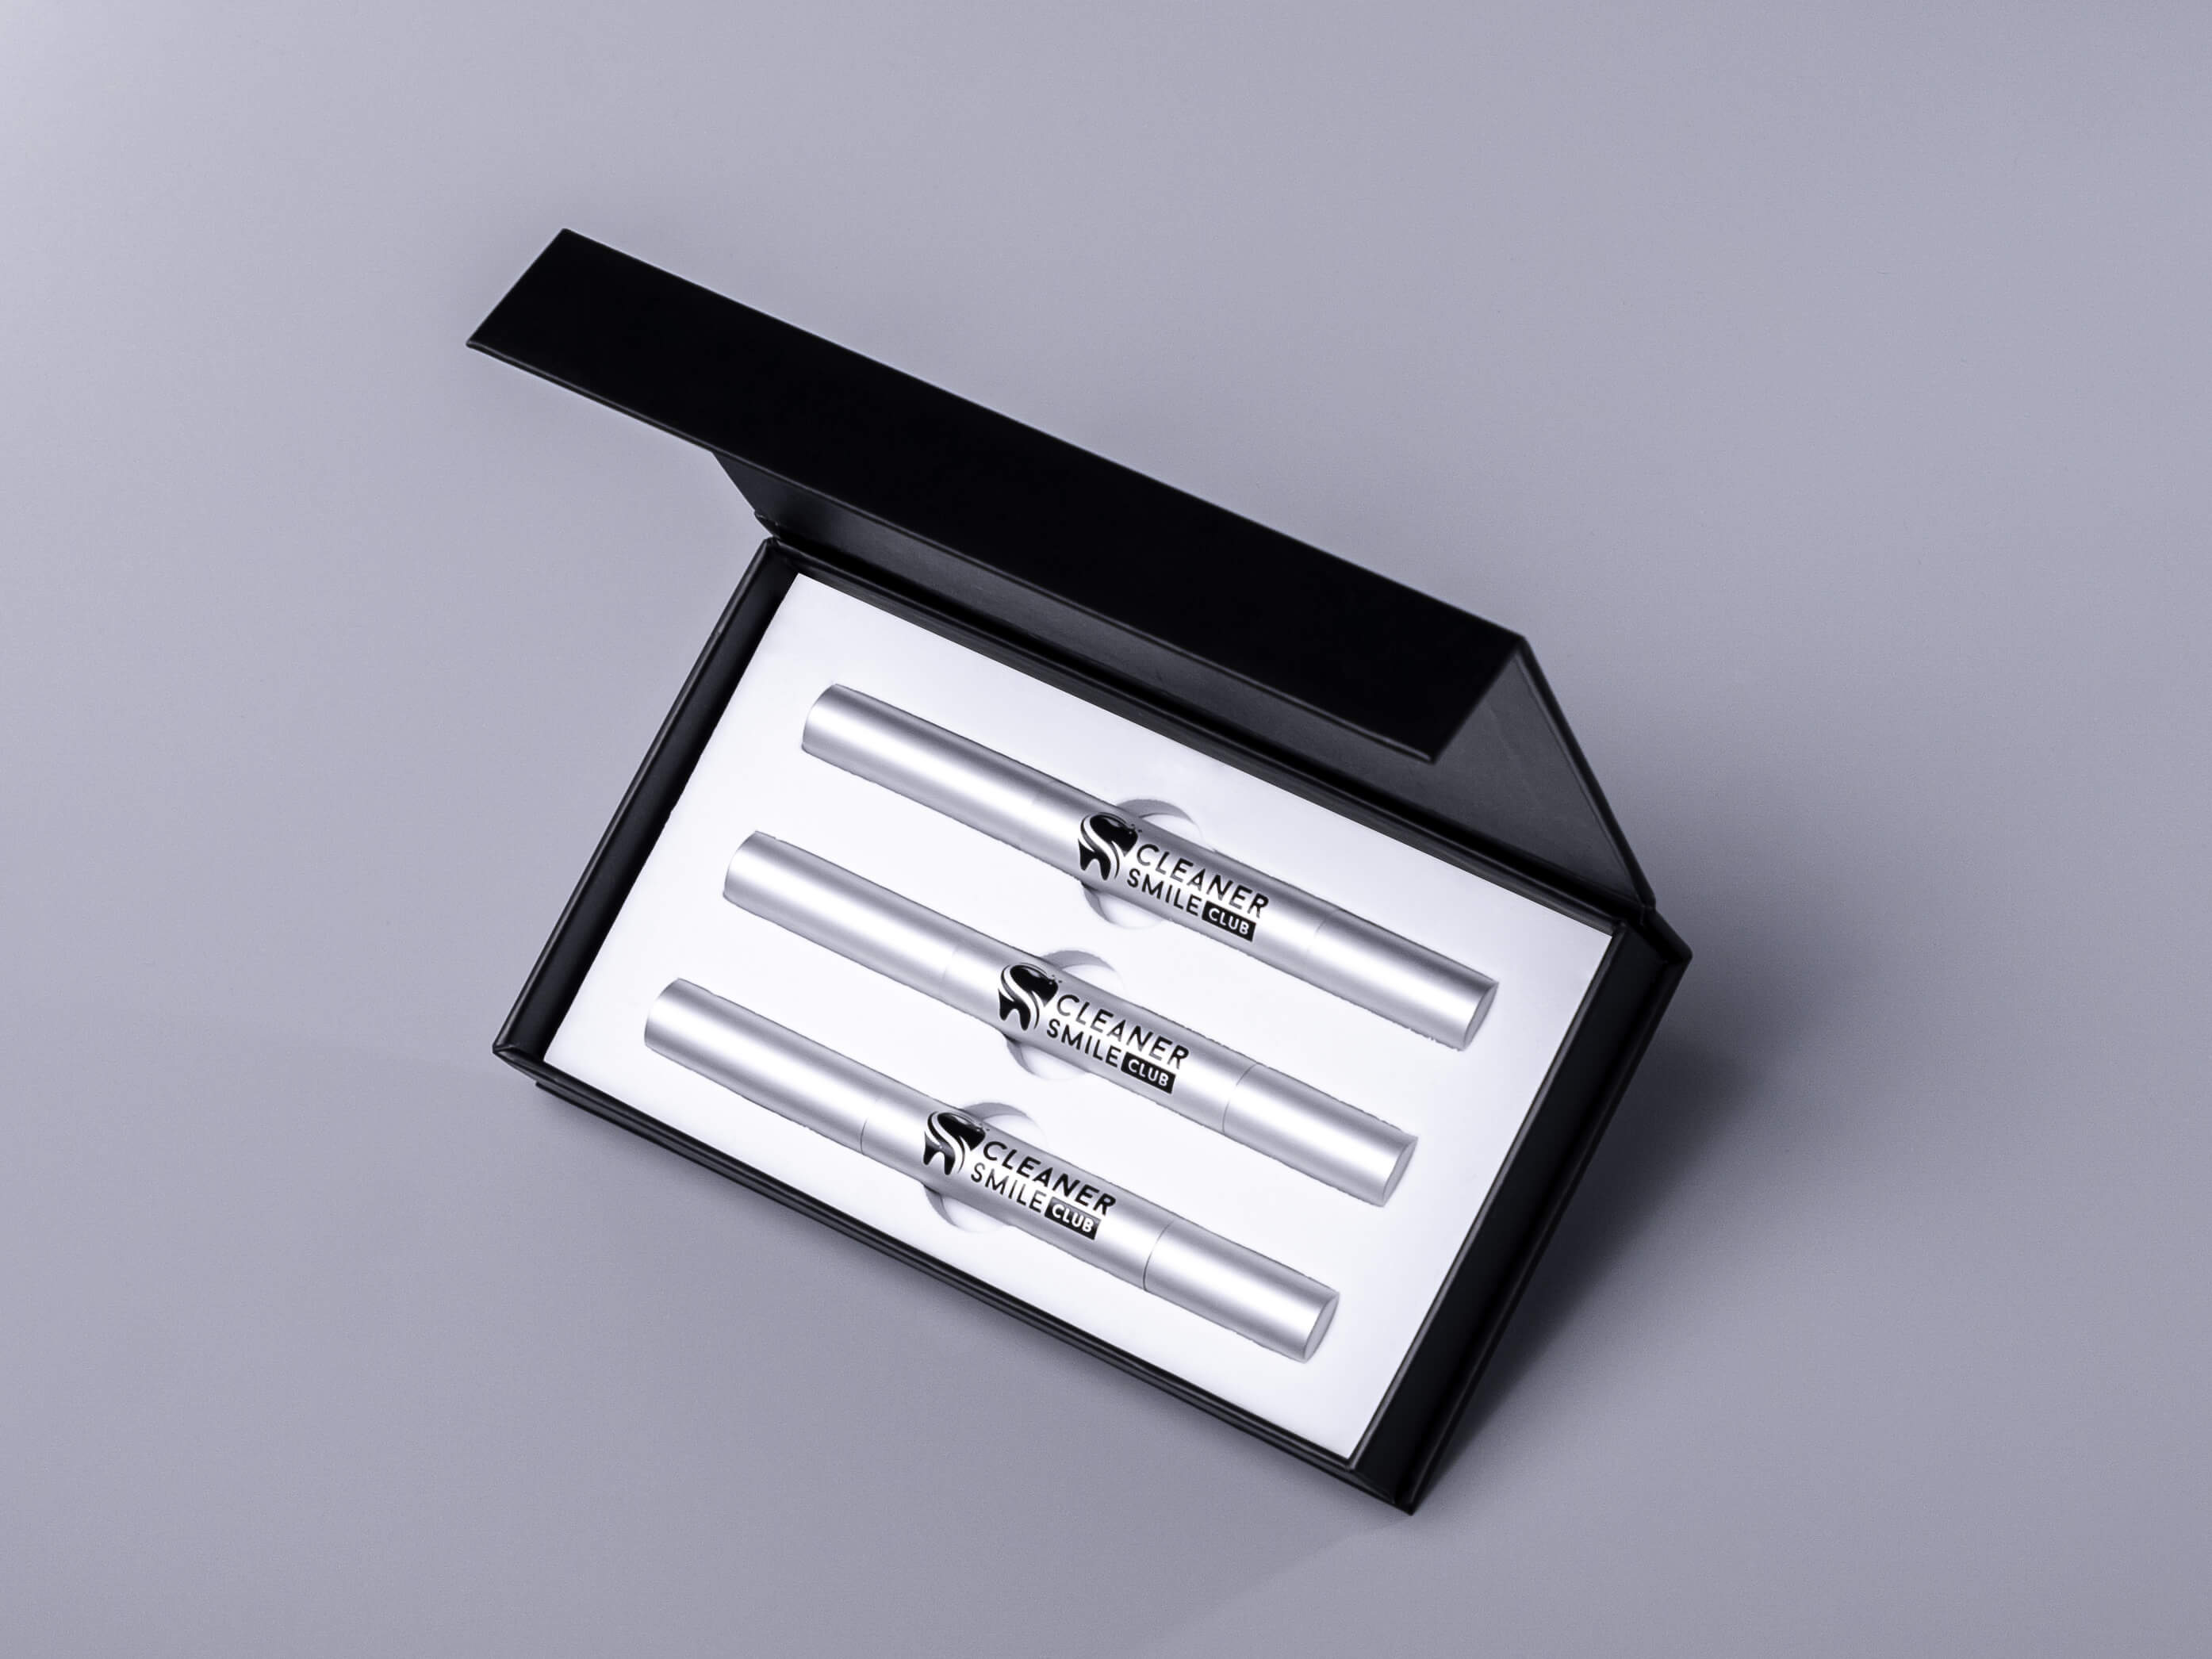 Very effective teeth whitening treatment black kit on the grey background with 3 whitening pens with black brand identity logo of the brand from Whitening Cosmetic Brand Cleaner Smile Club this pro photo production made by Fantastic Imago Branding, Advertising and Consulting Agency